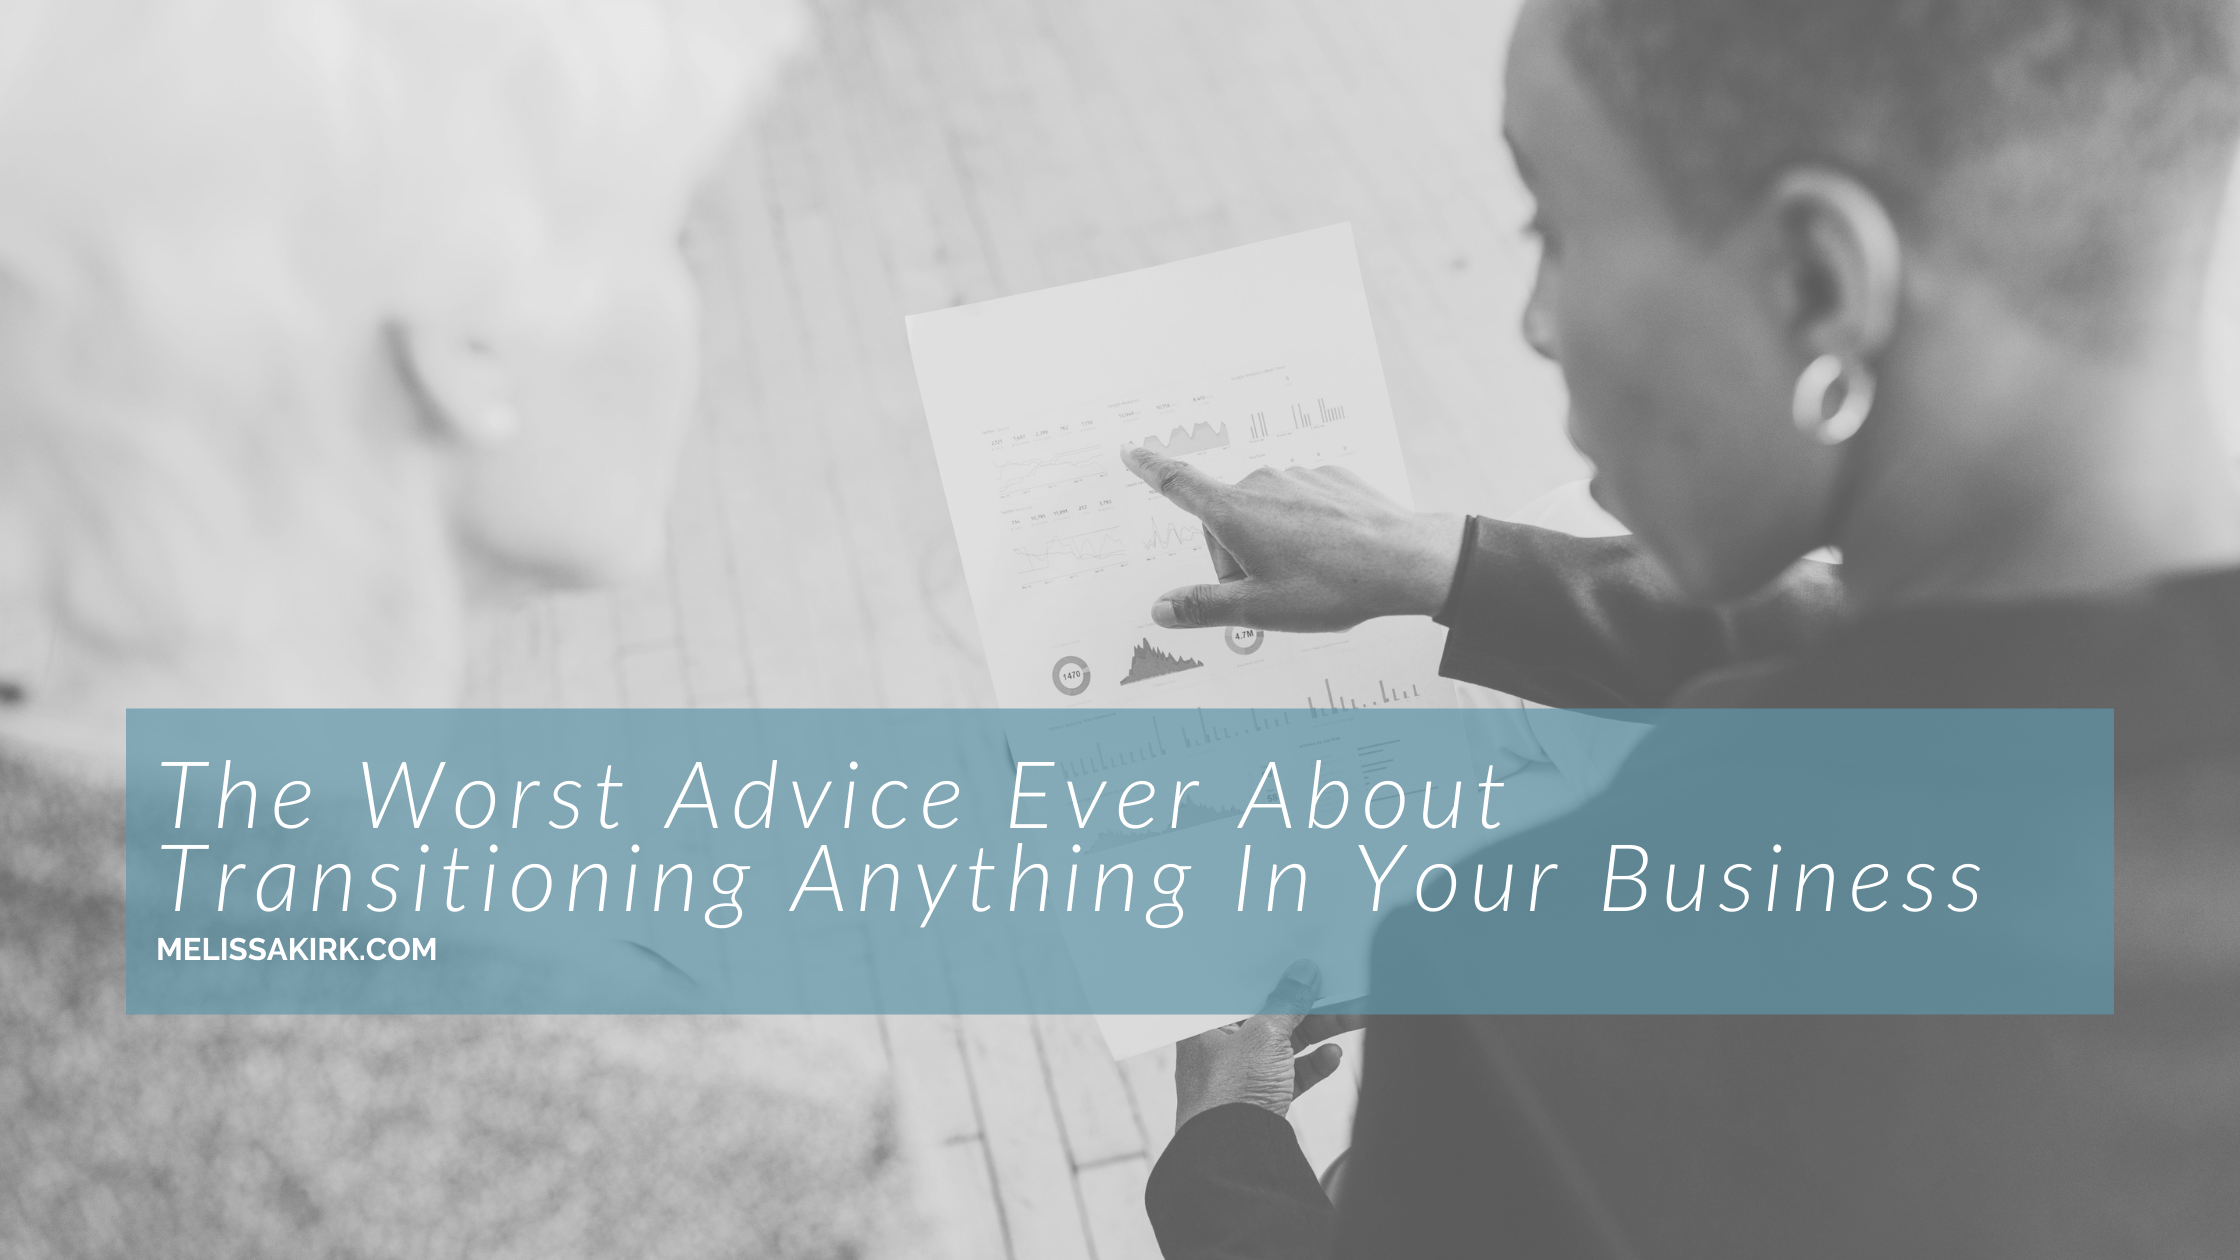 The Worst Advice Ever About Transitioning Anything In Your Business